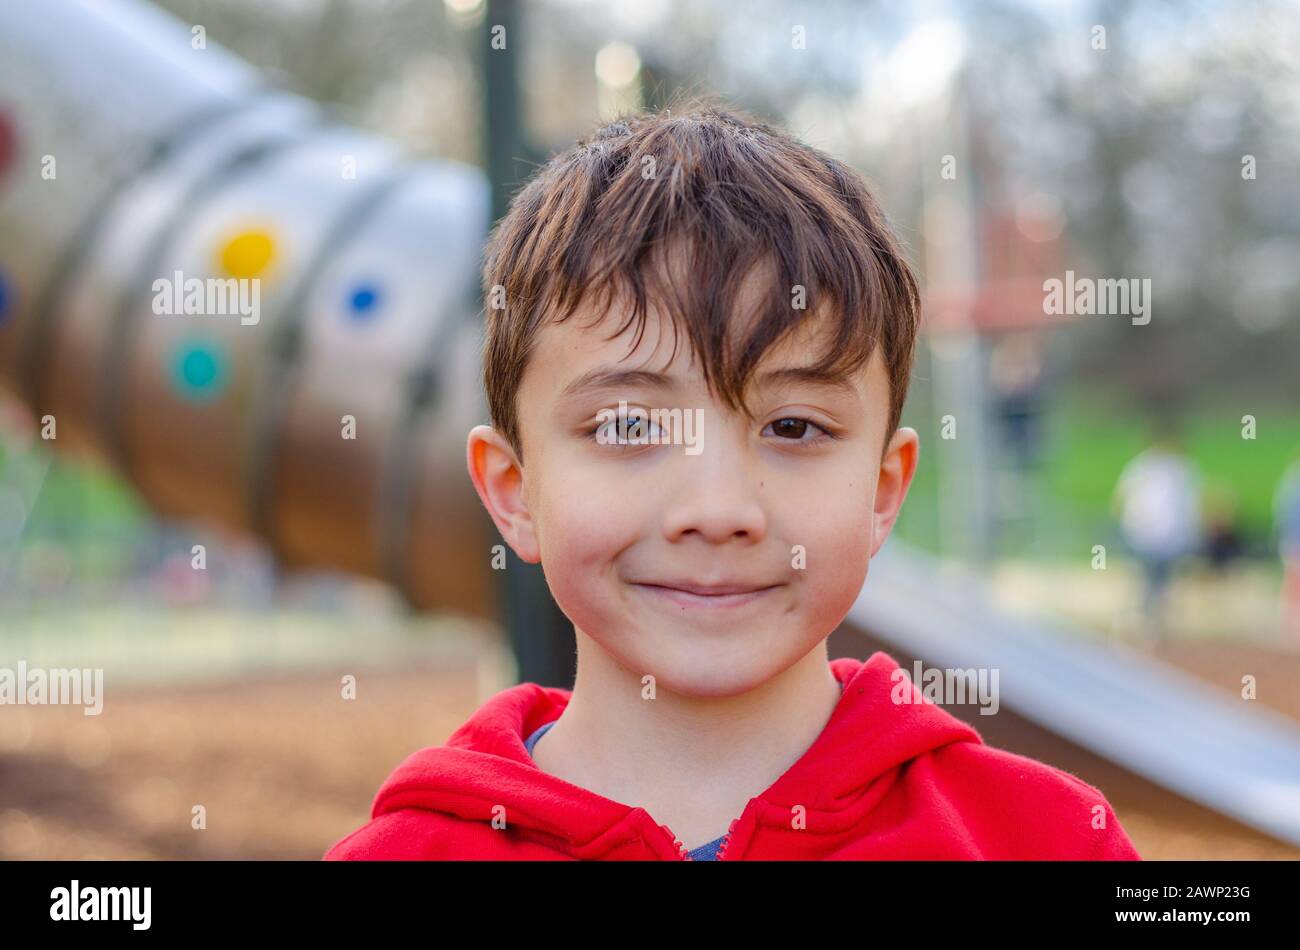 Portrait of a young, happy, smiling boy in a children's playground. Stock Photo